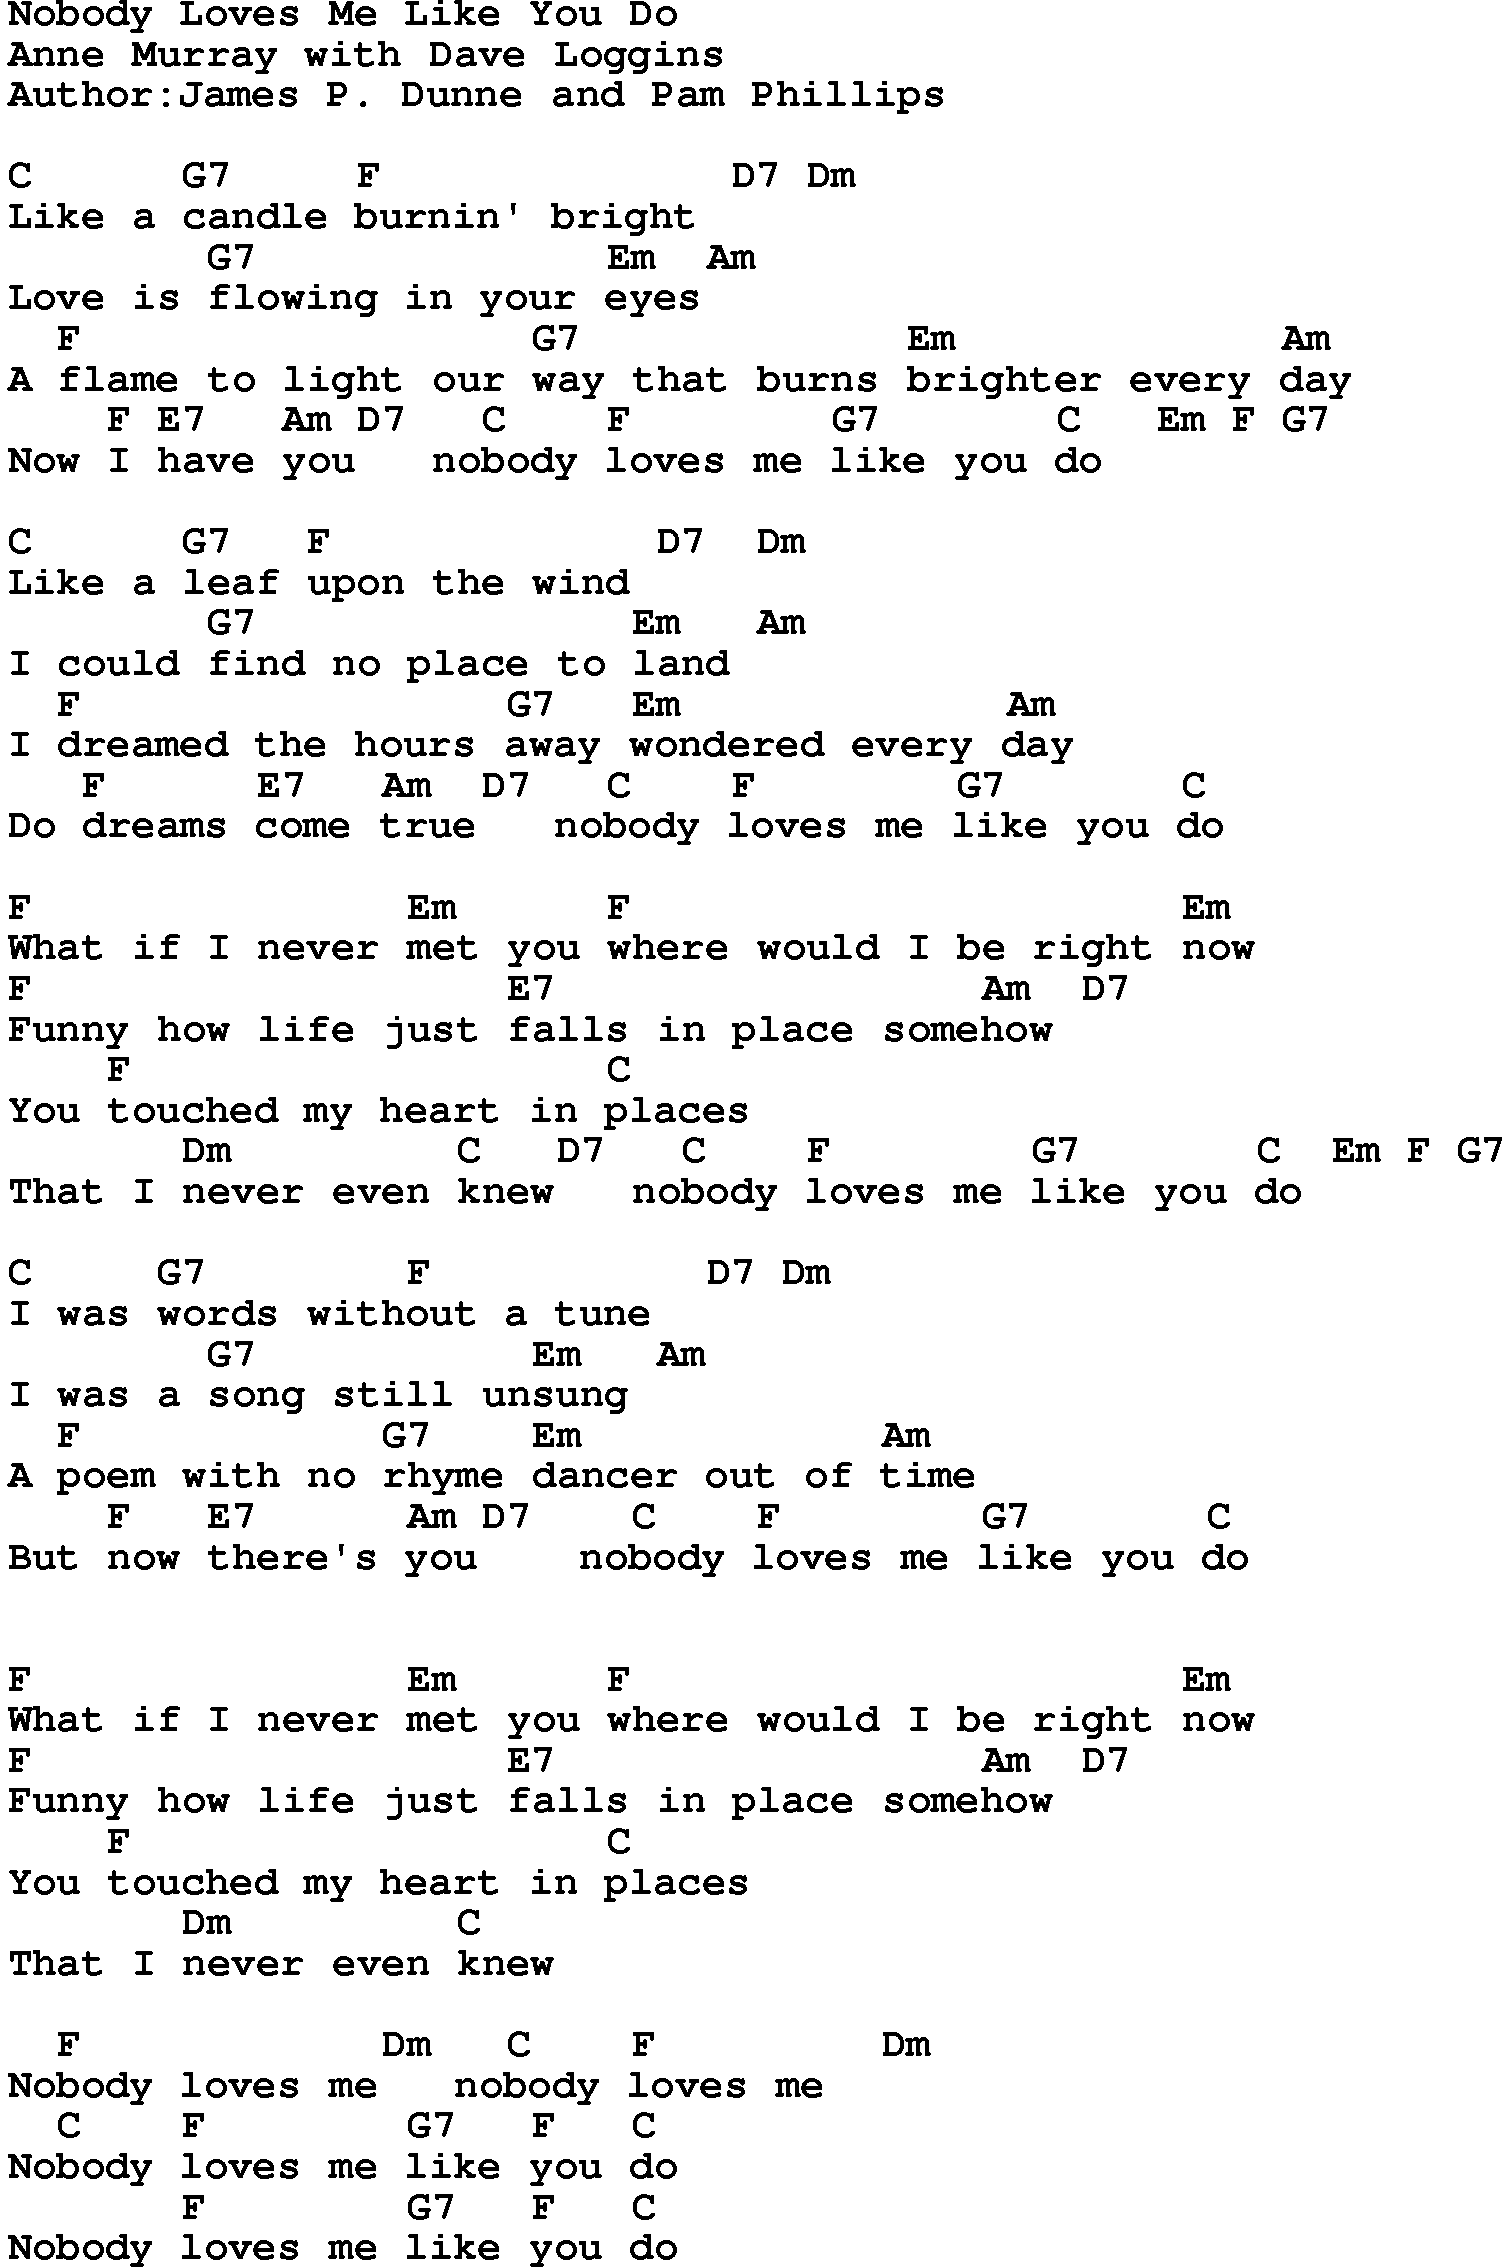 Country music song: Nobody Loves Me Like You Do lyrics and chords